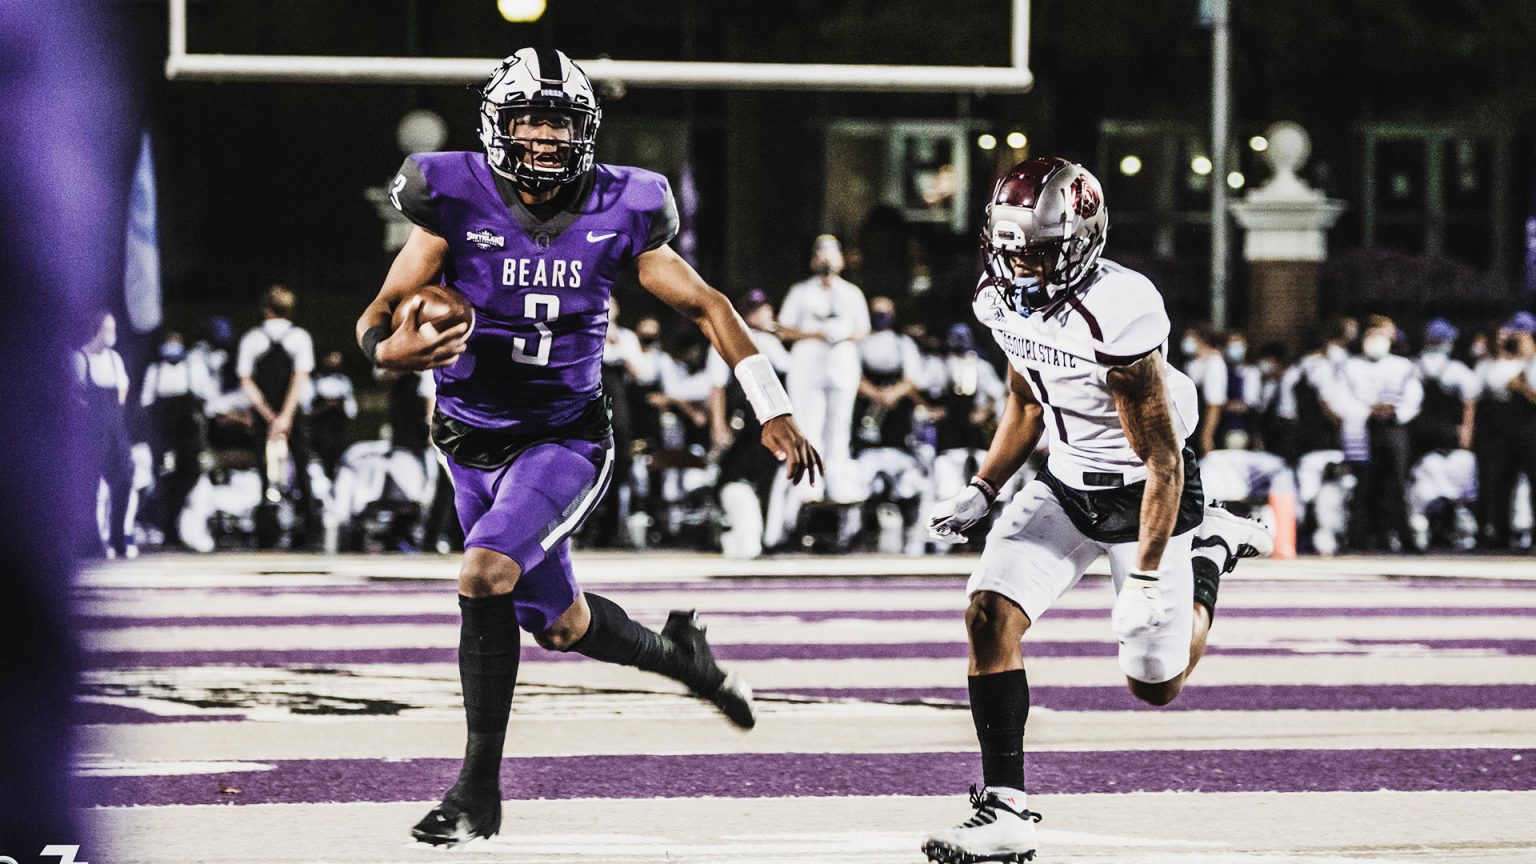 2021 Fcs Season Preview Central Arkansas The College Sports Journal 6056